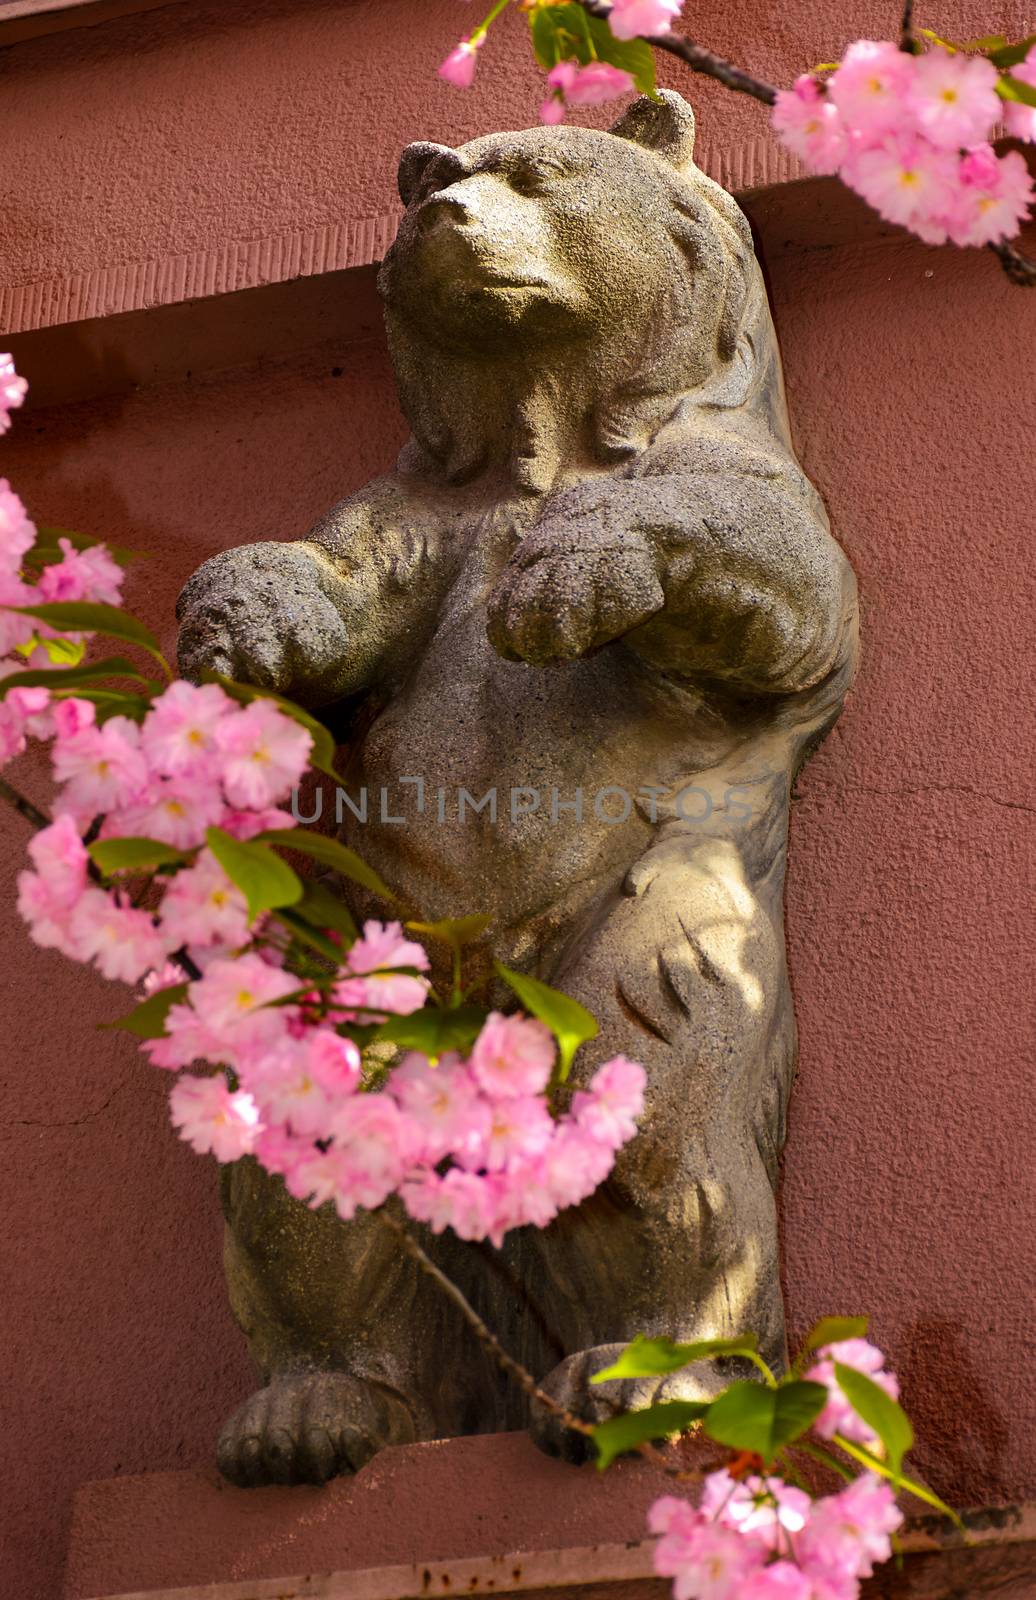 bear sculpture among the cherry blossom flowers by Pellinni